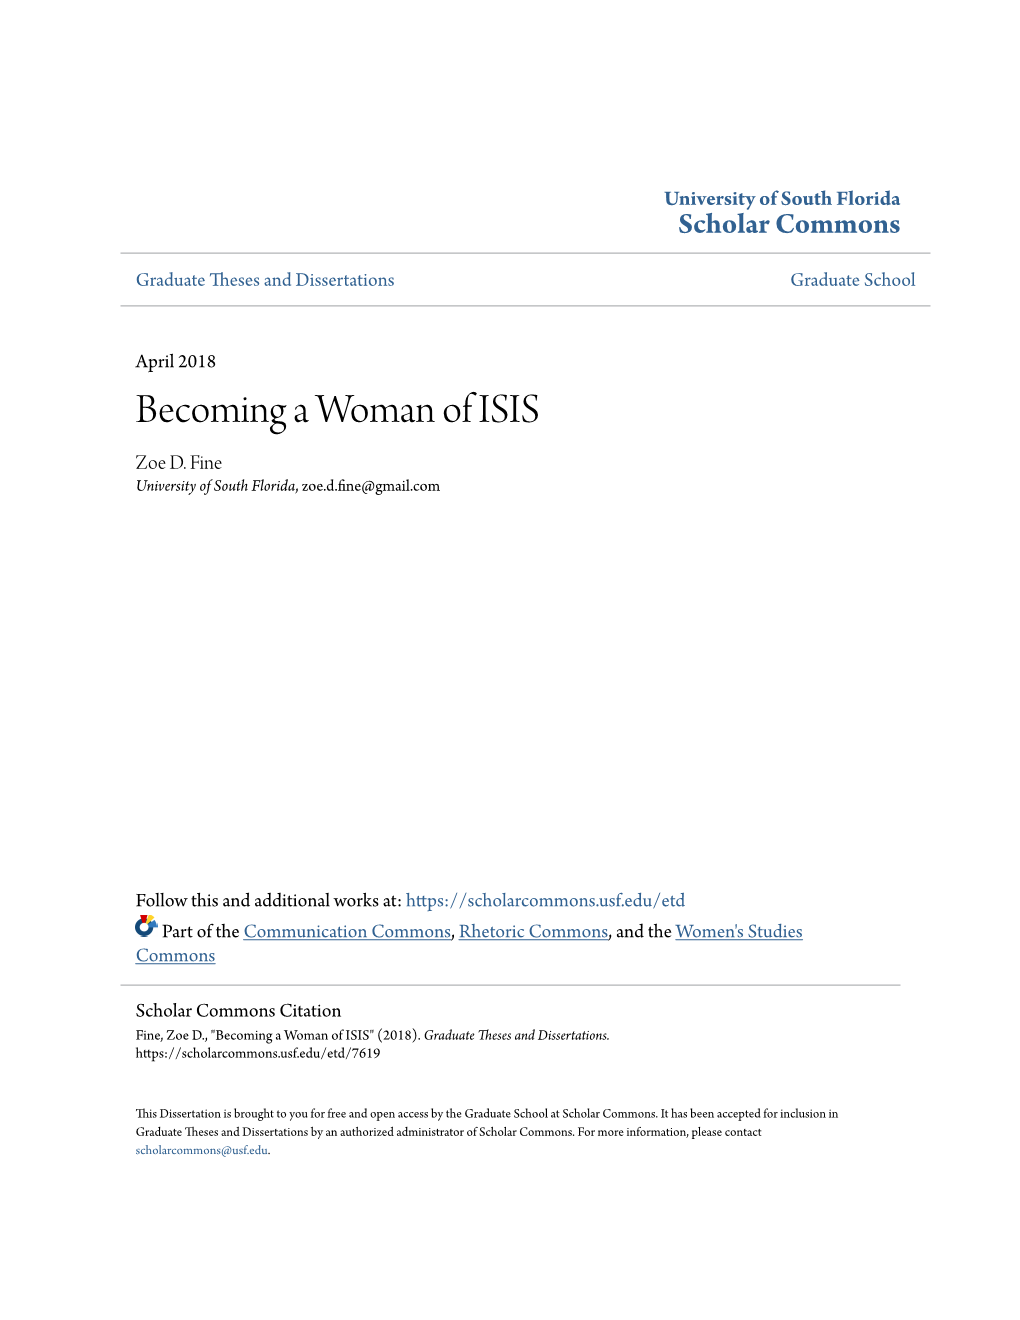 Becoming a Woman of ISIS Zoe D